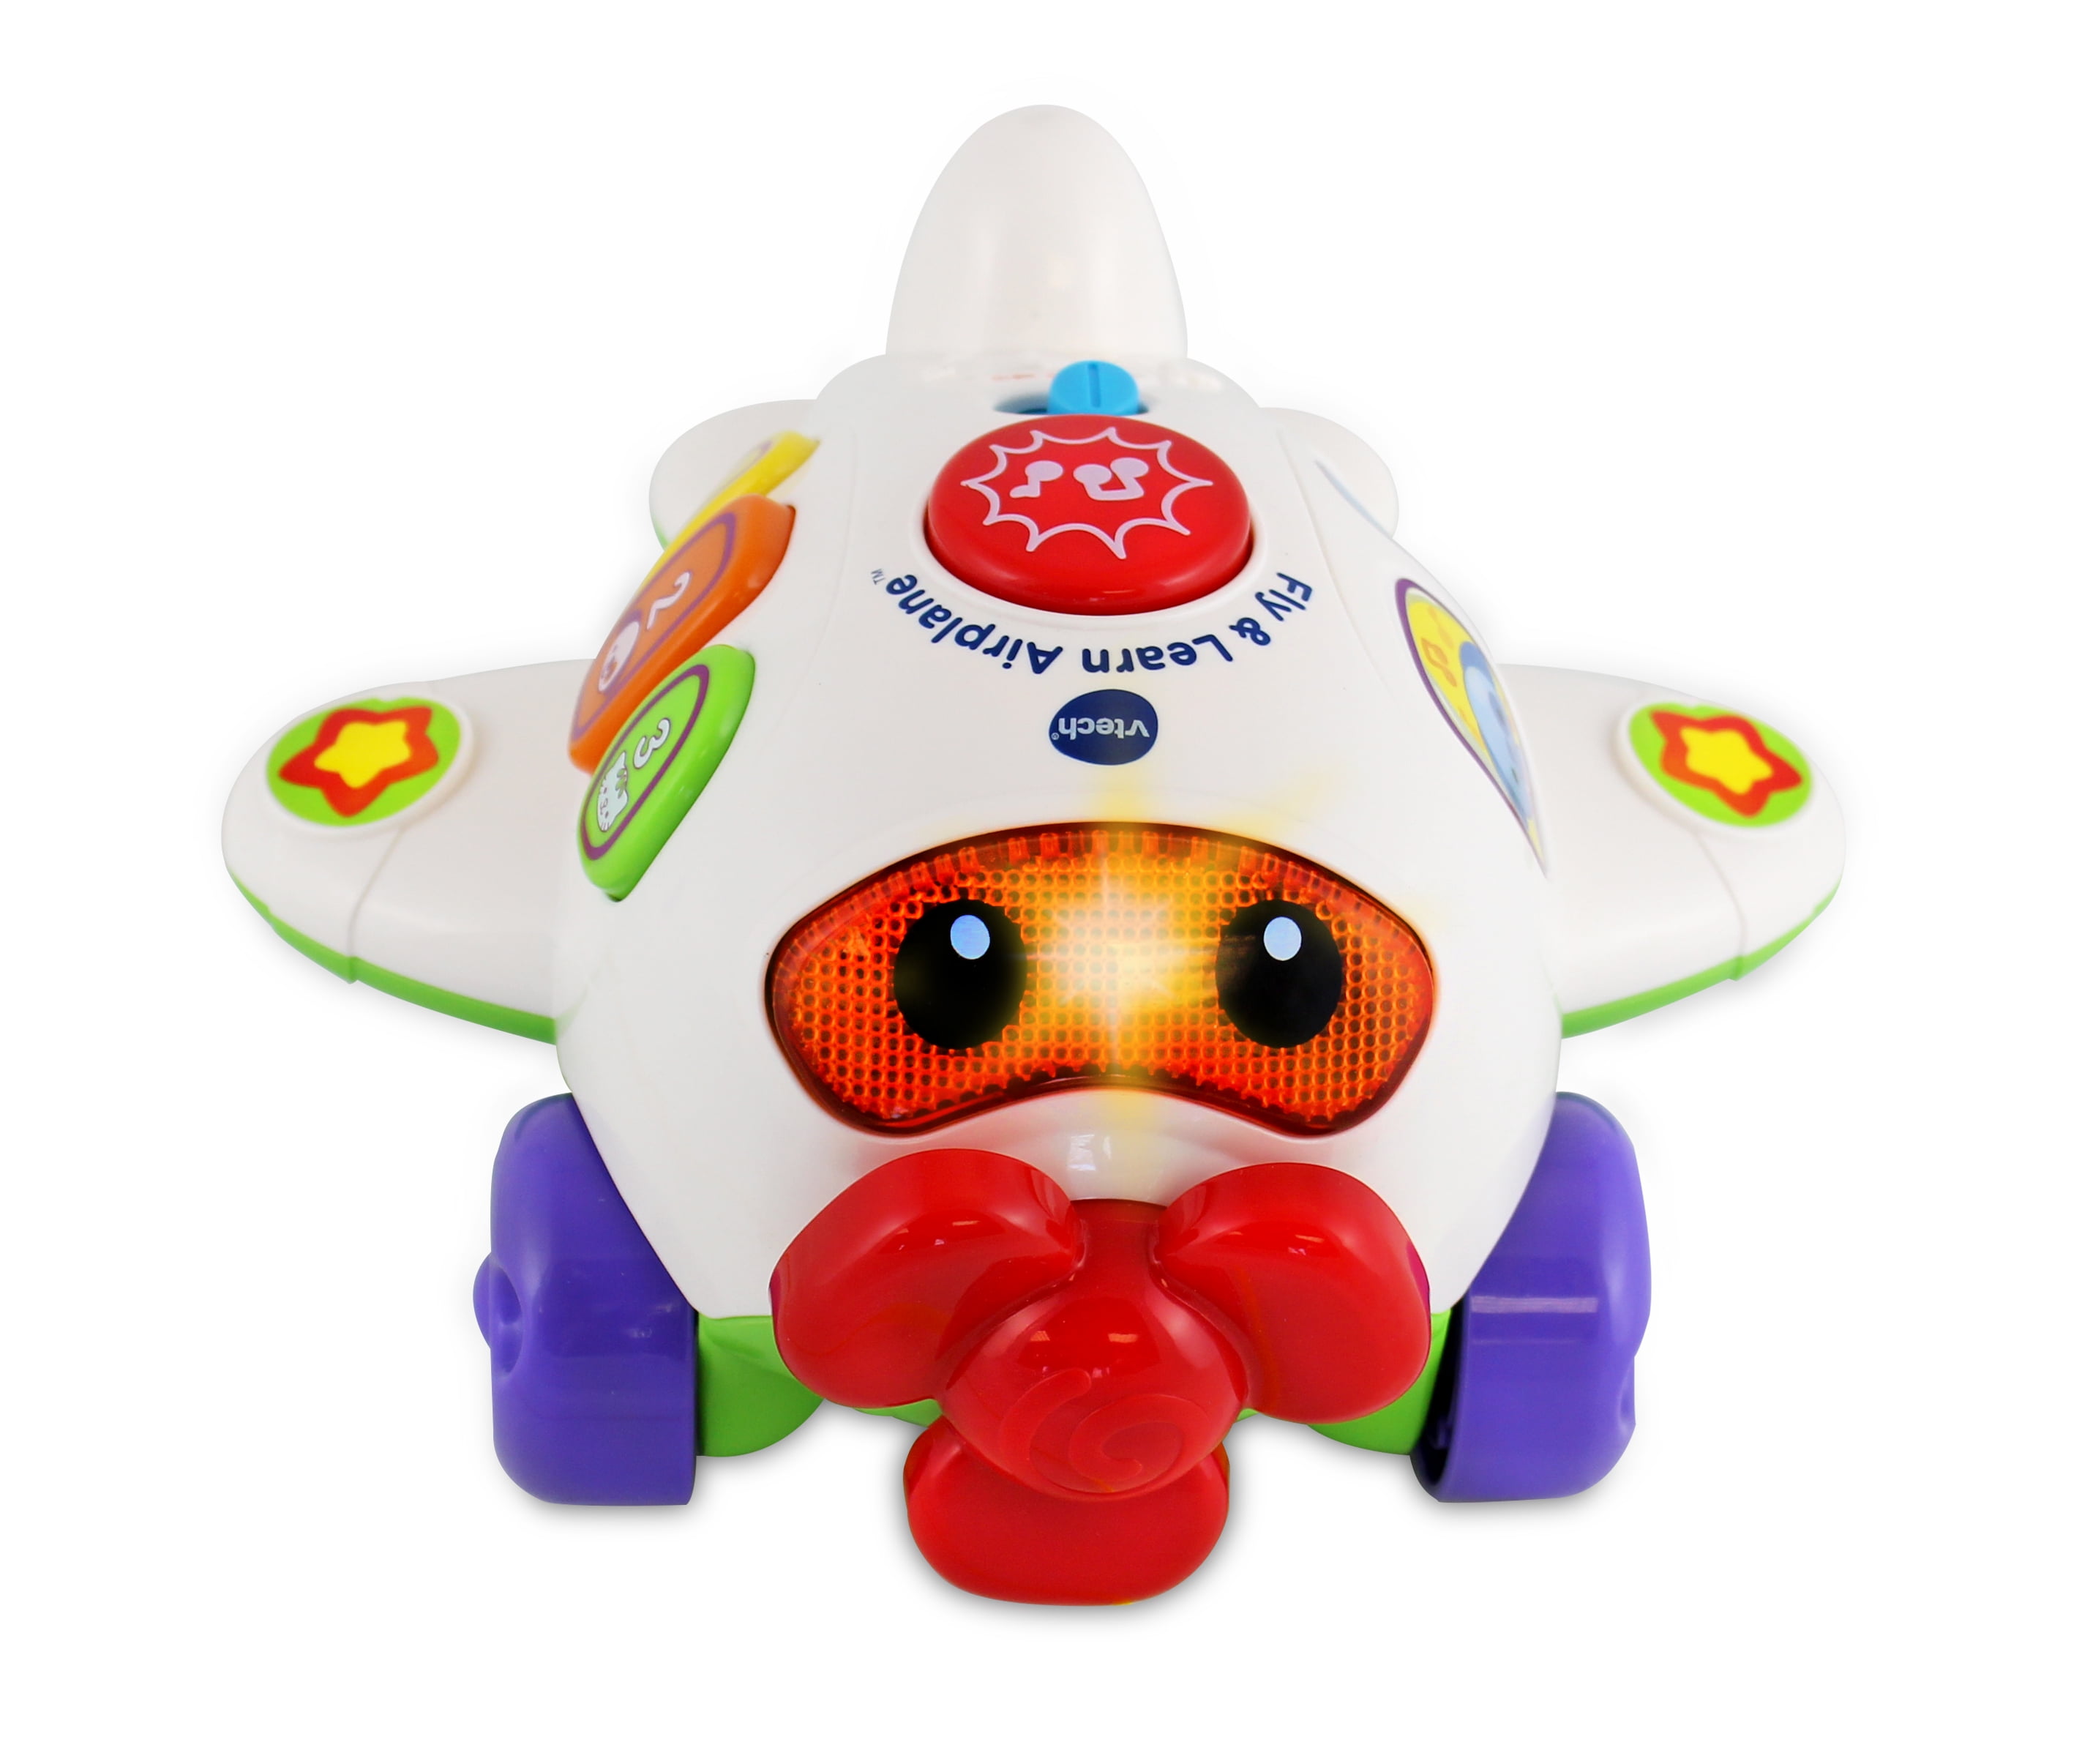 VTech Fly and Learn Airplane With Learning Phrases and Sing-Along Songs 